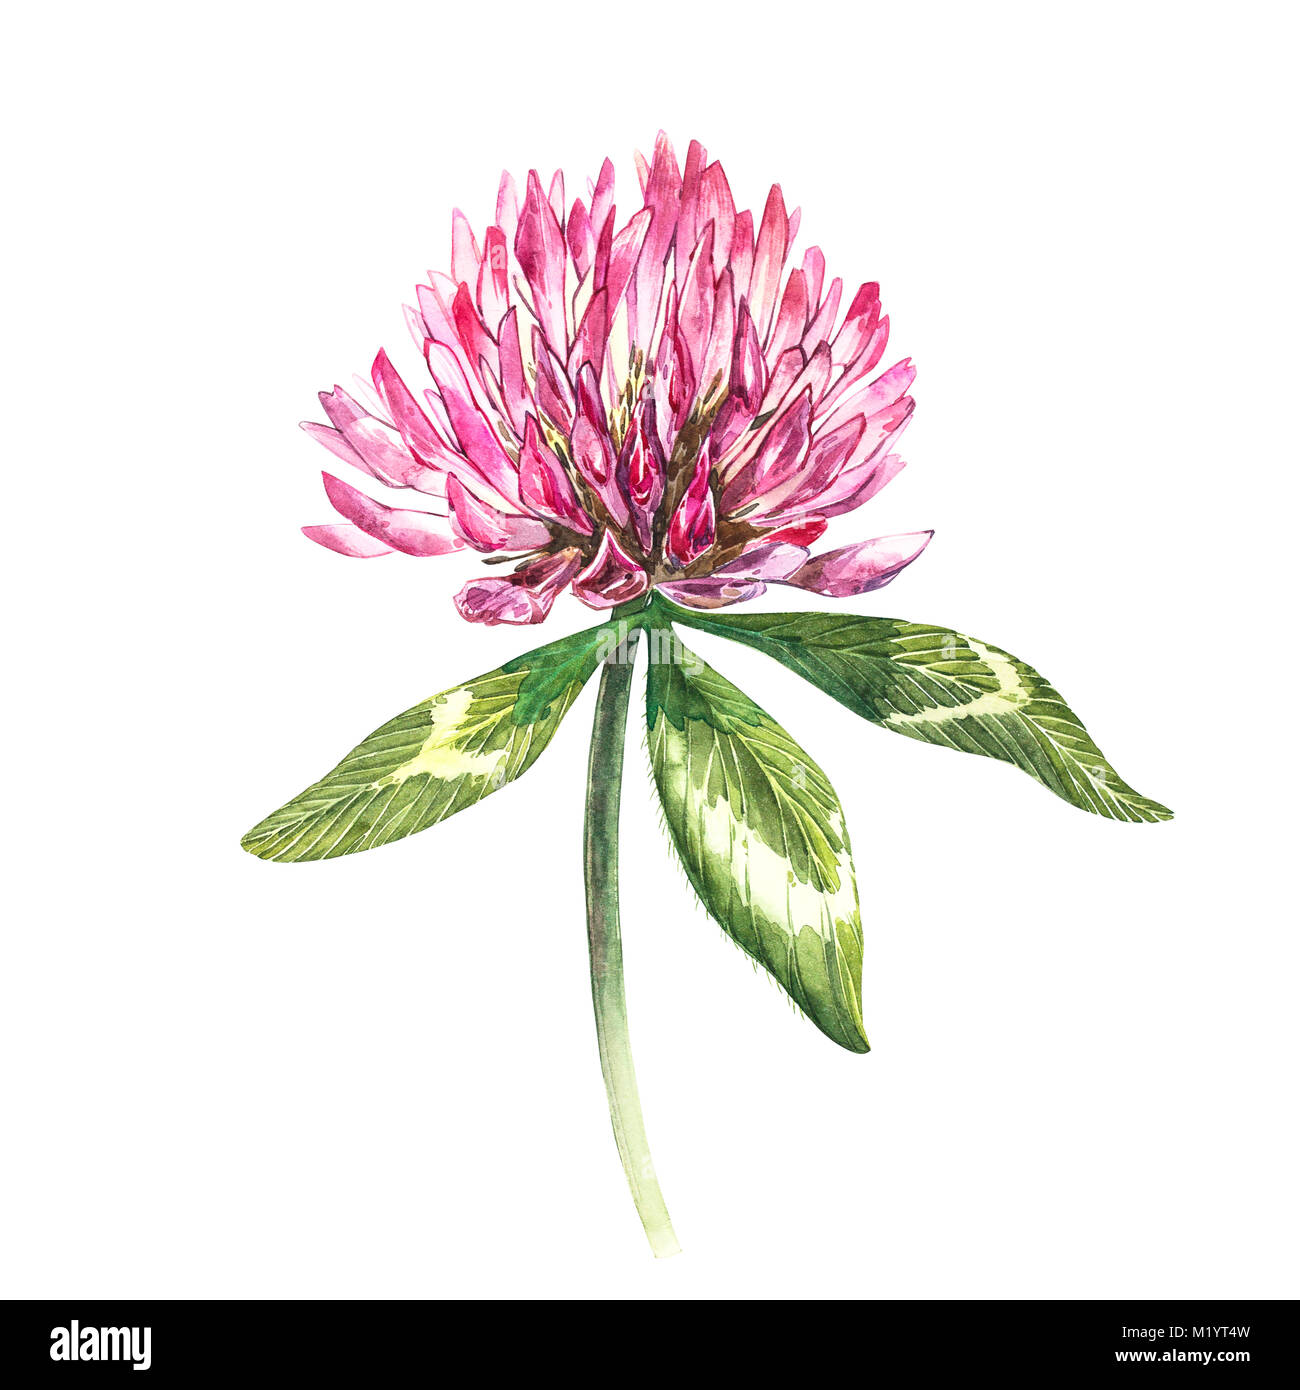 Flower of red clover with leaves. Watercolor botanical illustration isolated on white background. Happy Saint Patricks Day. Stock Photo